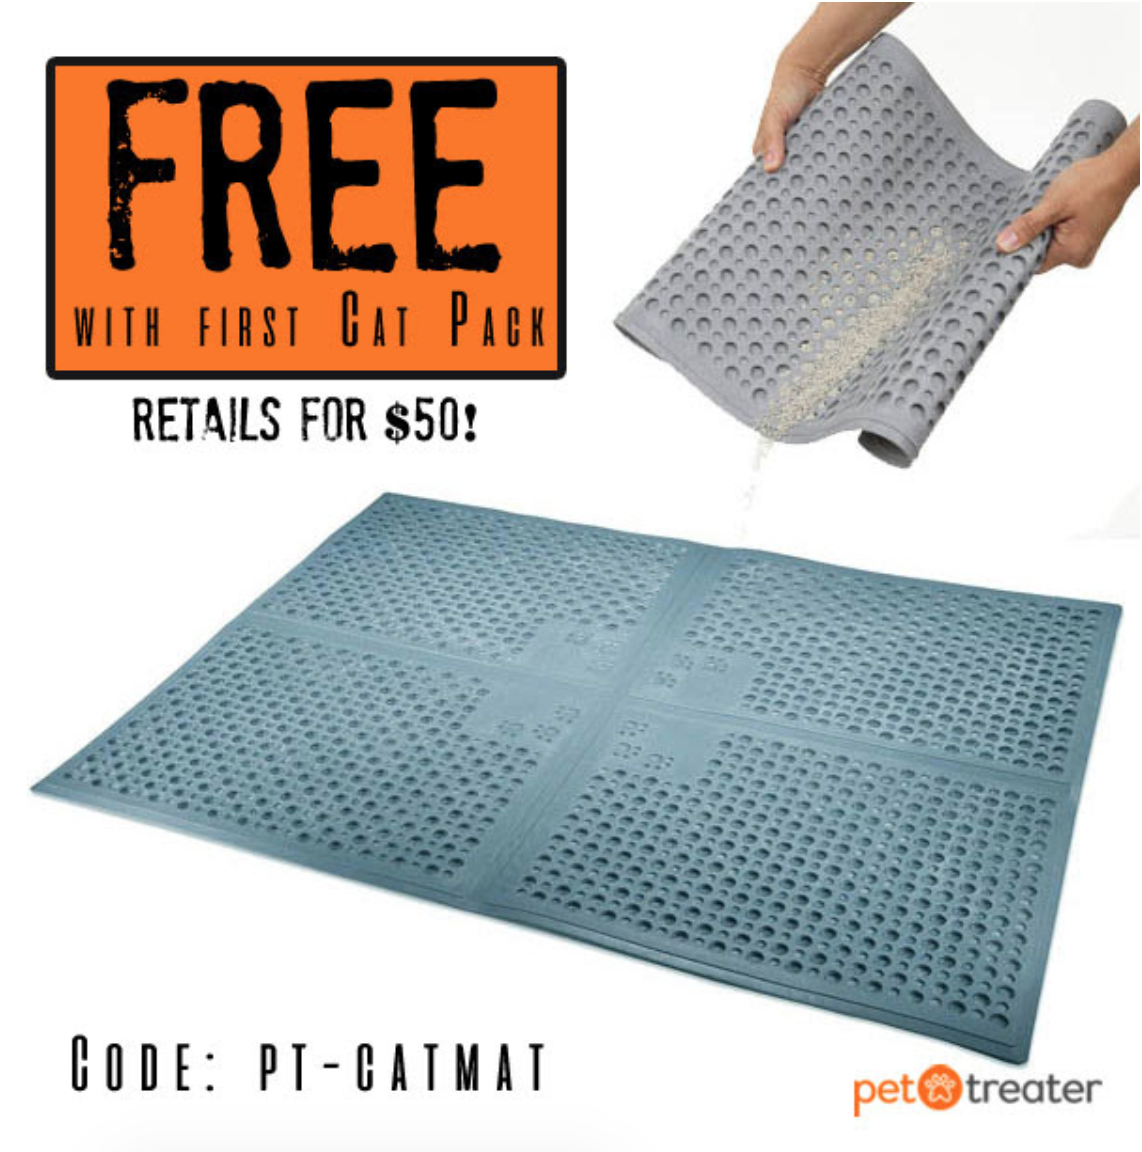 Pet Treater Coupon – Free Cat Mat With Subscription